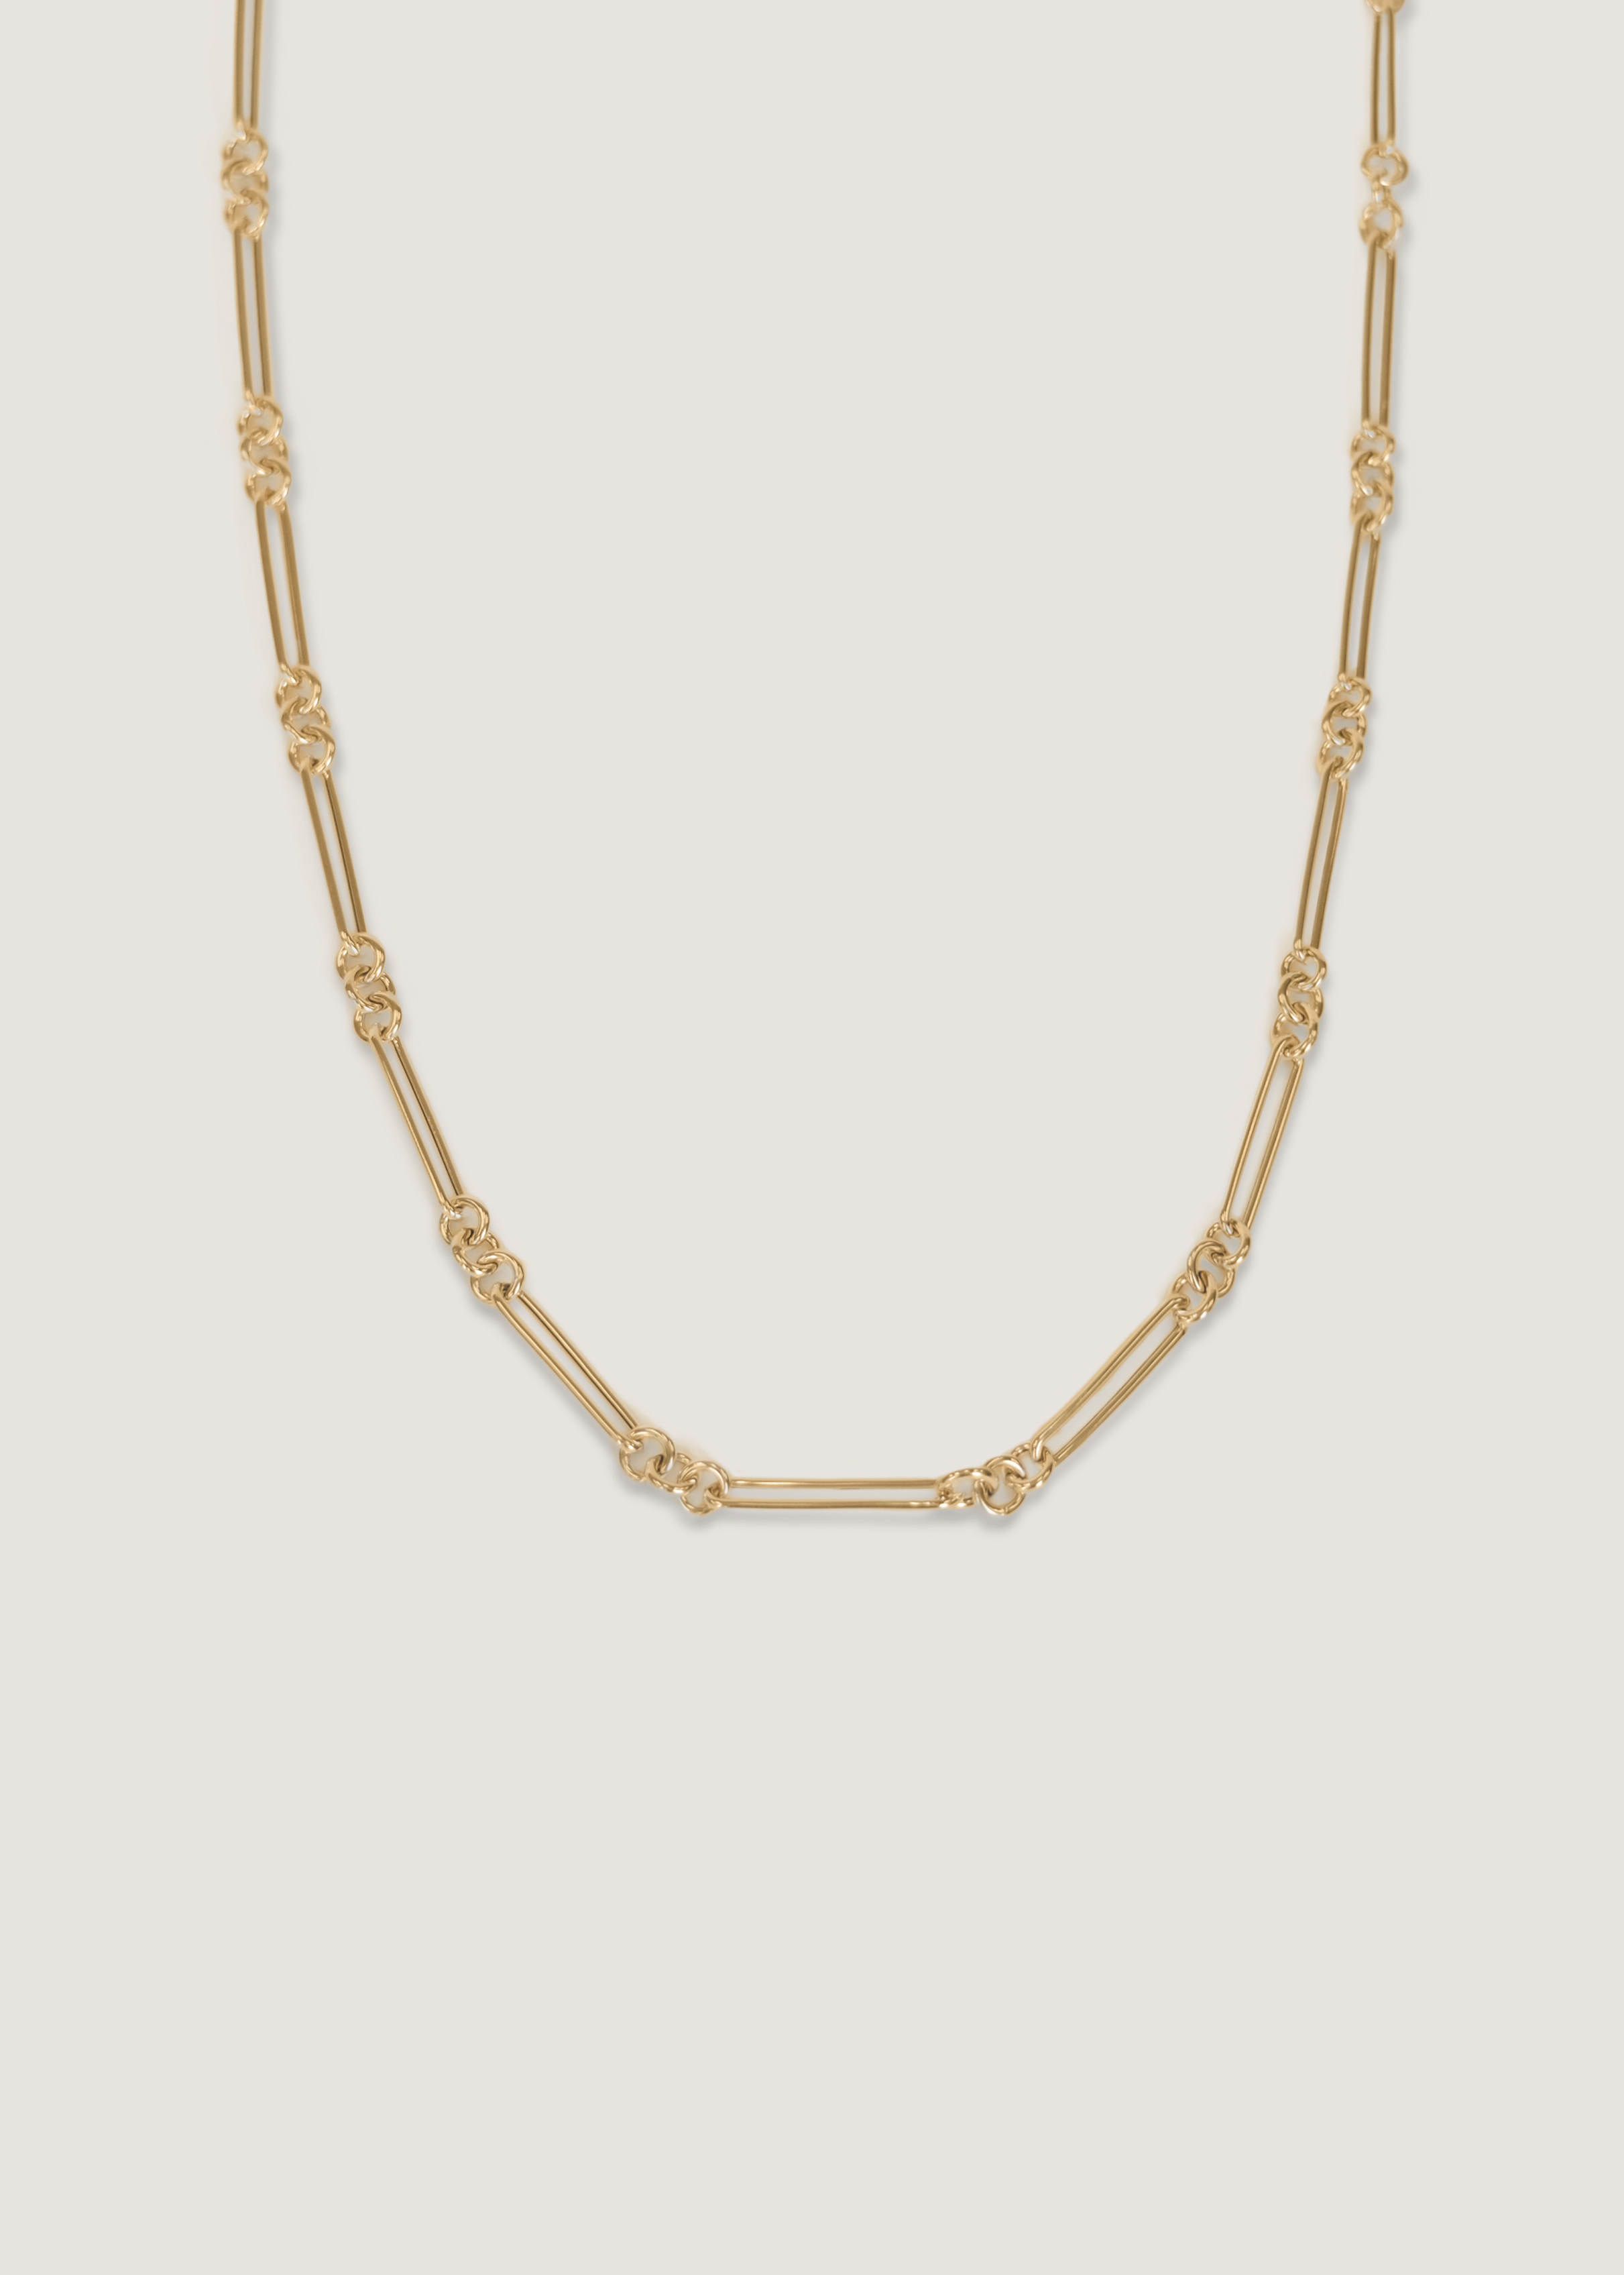 Mixed Link Chain Necklace